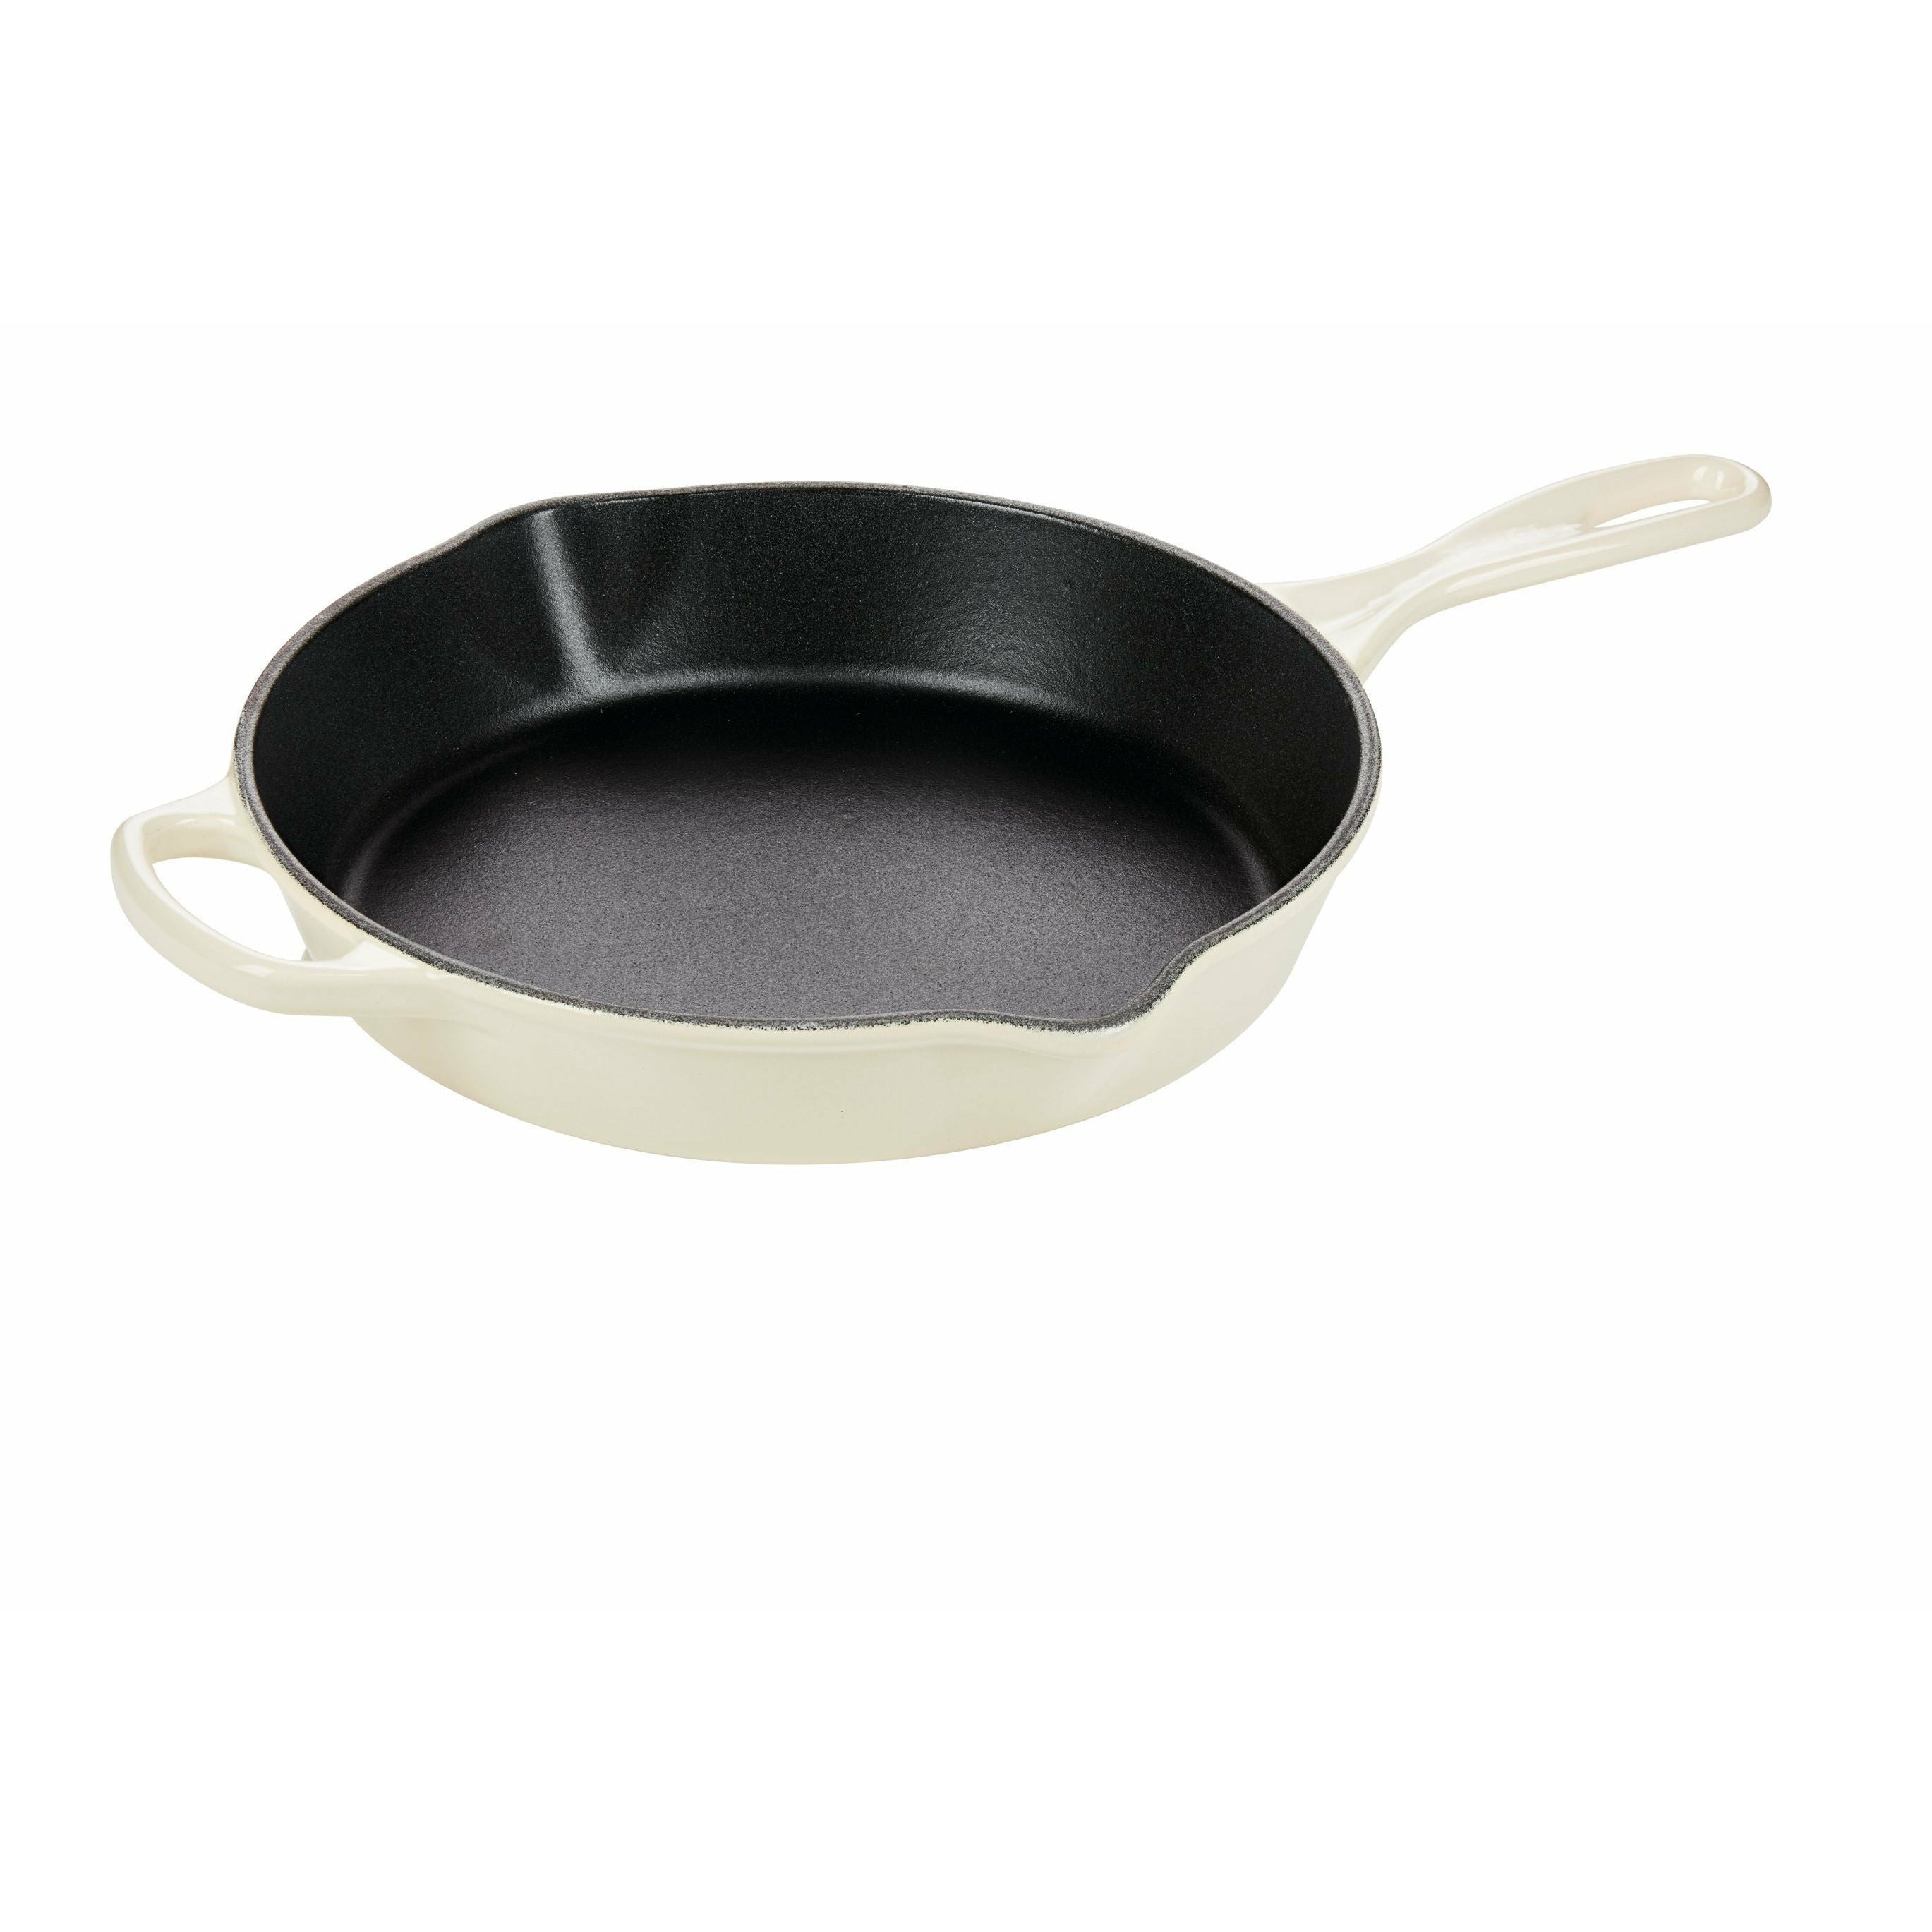 Le Creuset Nature High Frying and Serving Pan 26 cm, merengue